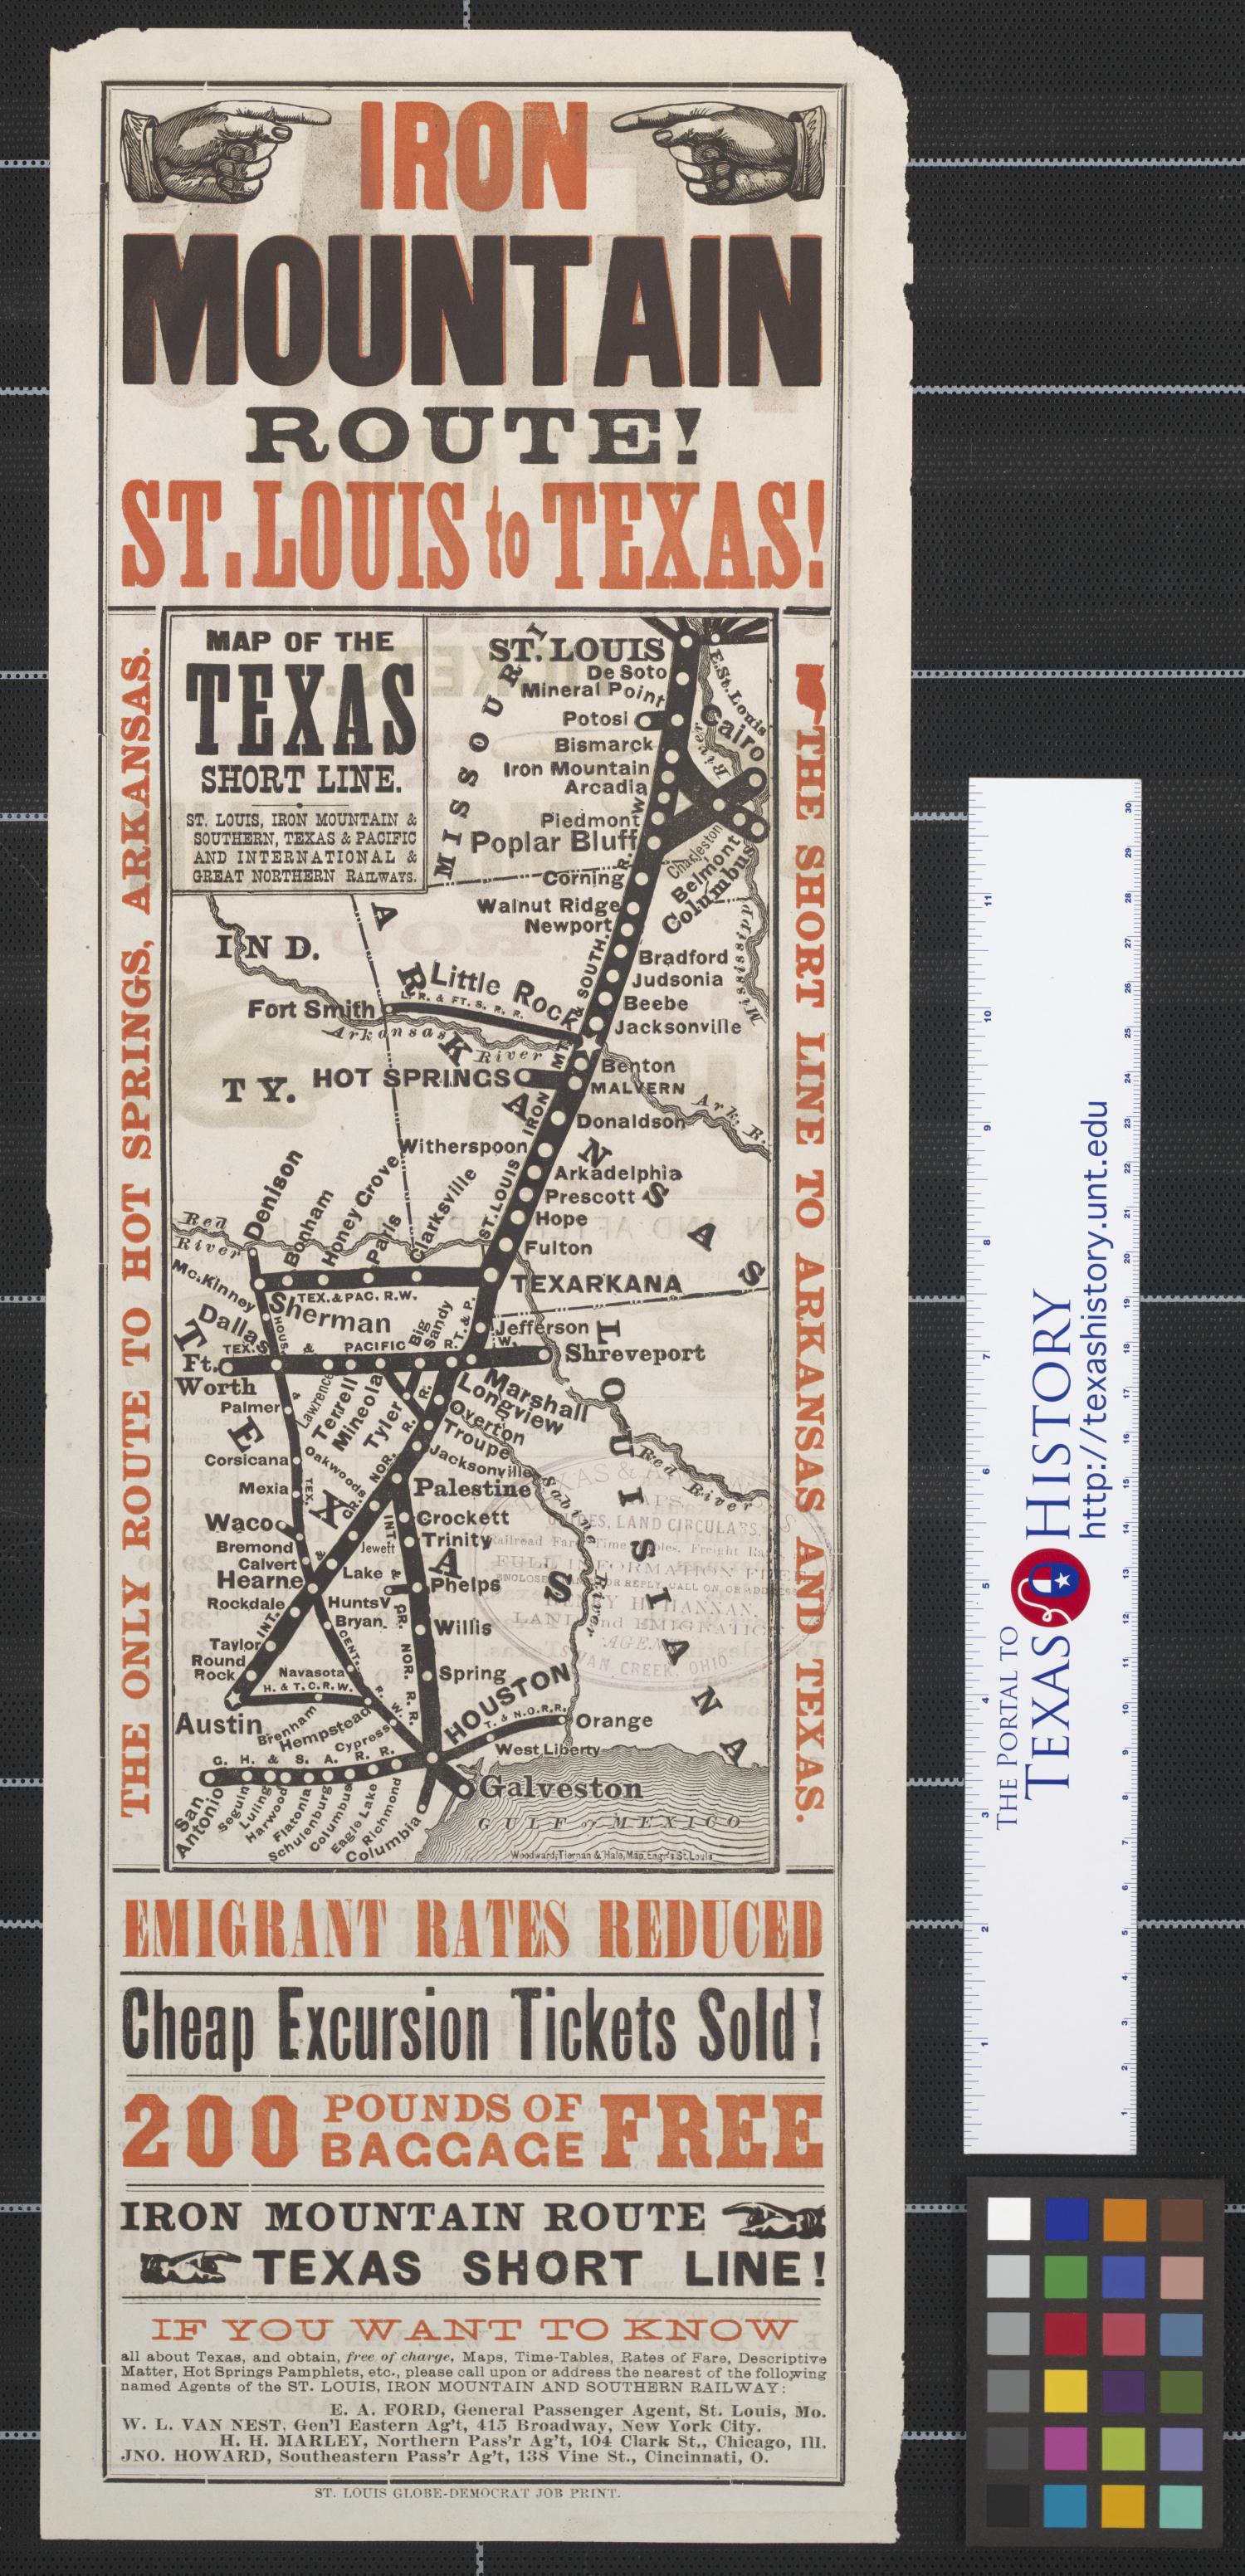 Map of the Texas short line: St. Louis, Iron Mountain & Southern, Texas & Pacific and International & Great Northern Railways.
                                                
                                                    [Sequence #]: 1 of 2
                                                